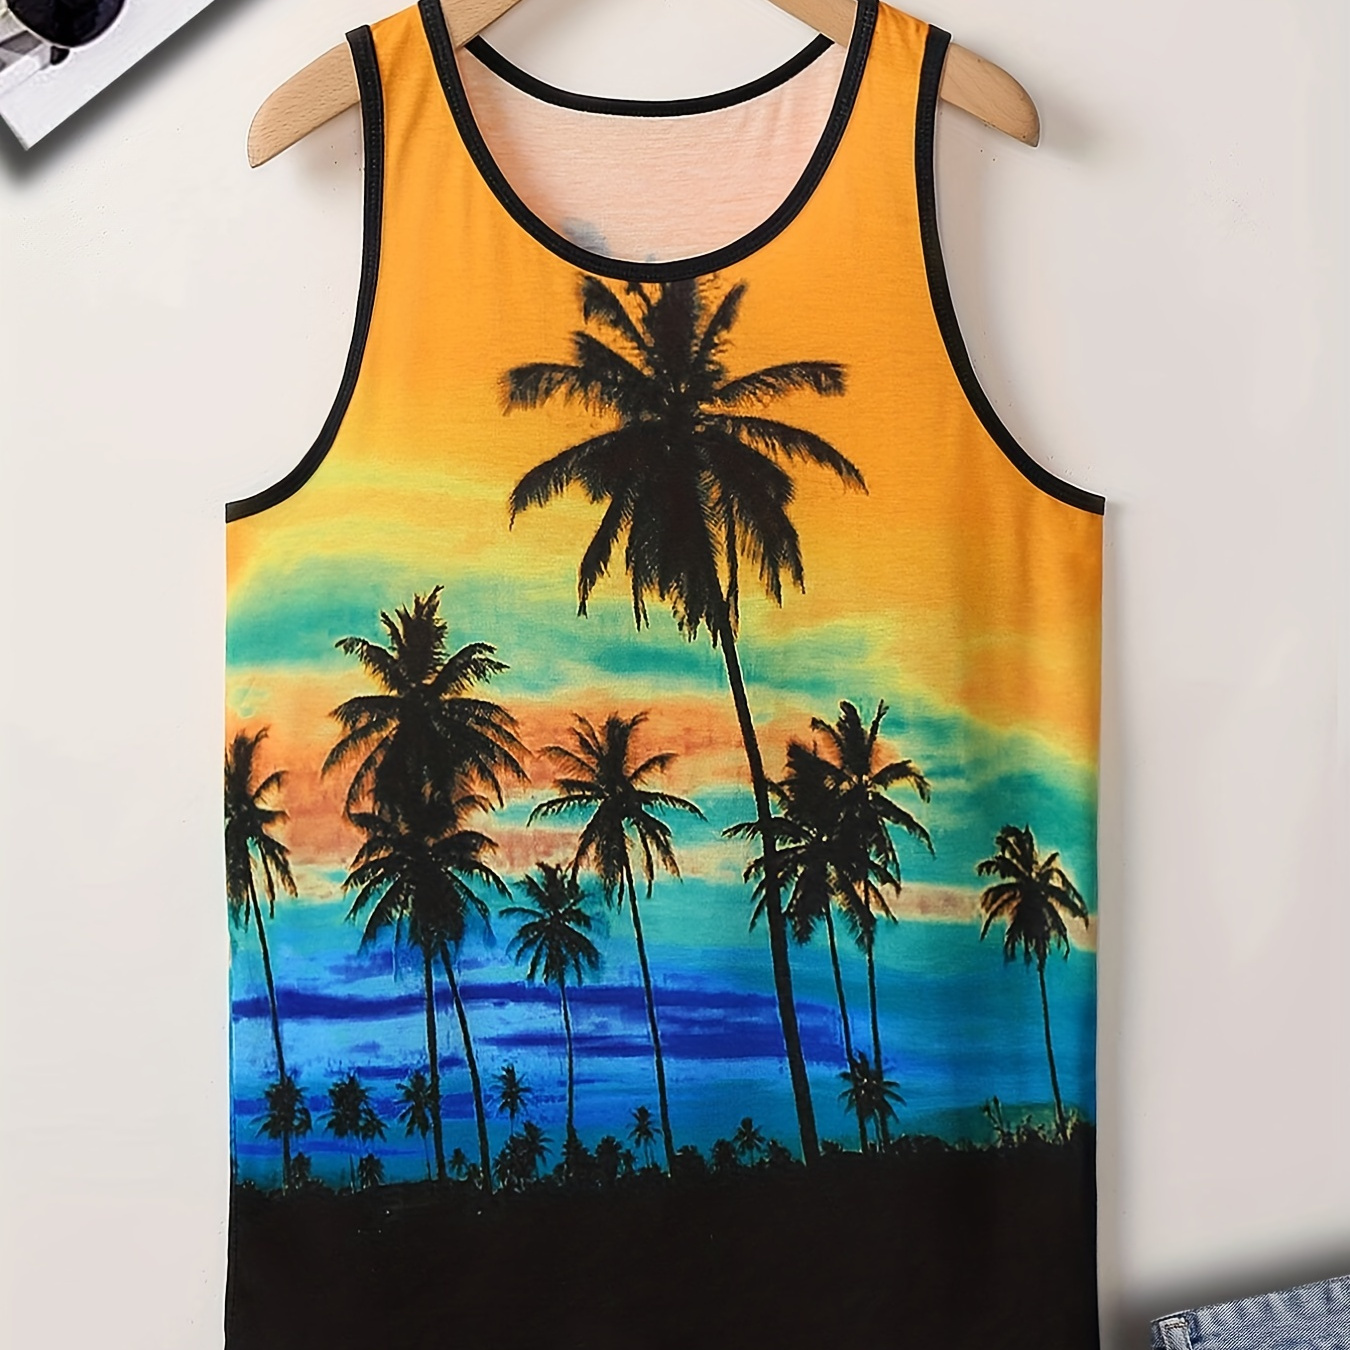 

Plus Size Men's Hawaiian Style Tropical Print Sleeveless Vest Workout Gym Tank Tops T Shirt, Best Sellers